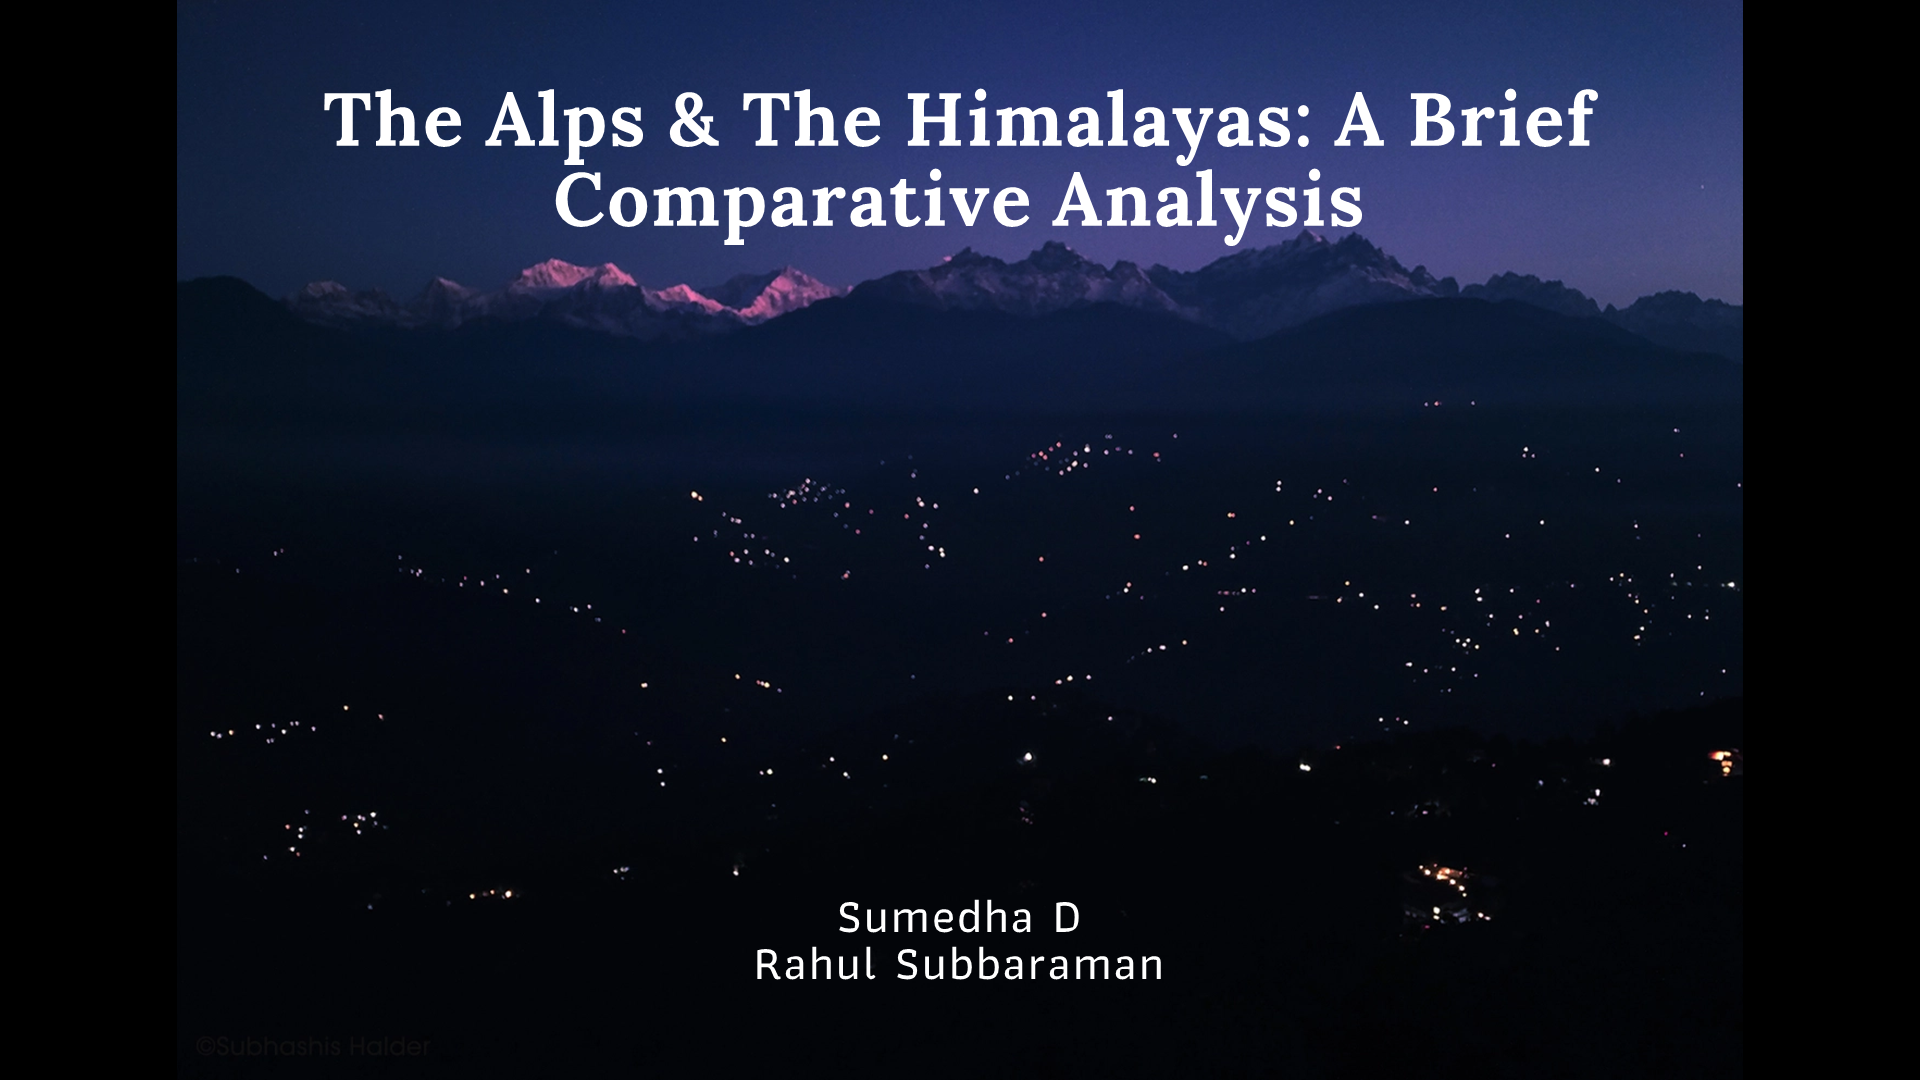 The Alps & The Himalayas: A Brief Comparative Analysis - The Qrius Rhino